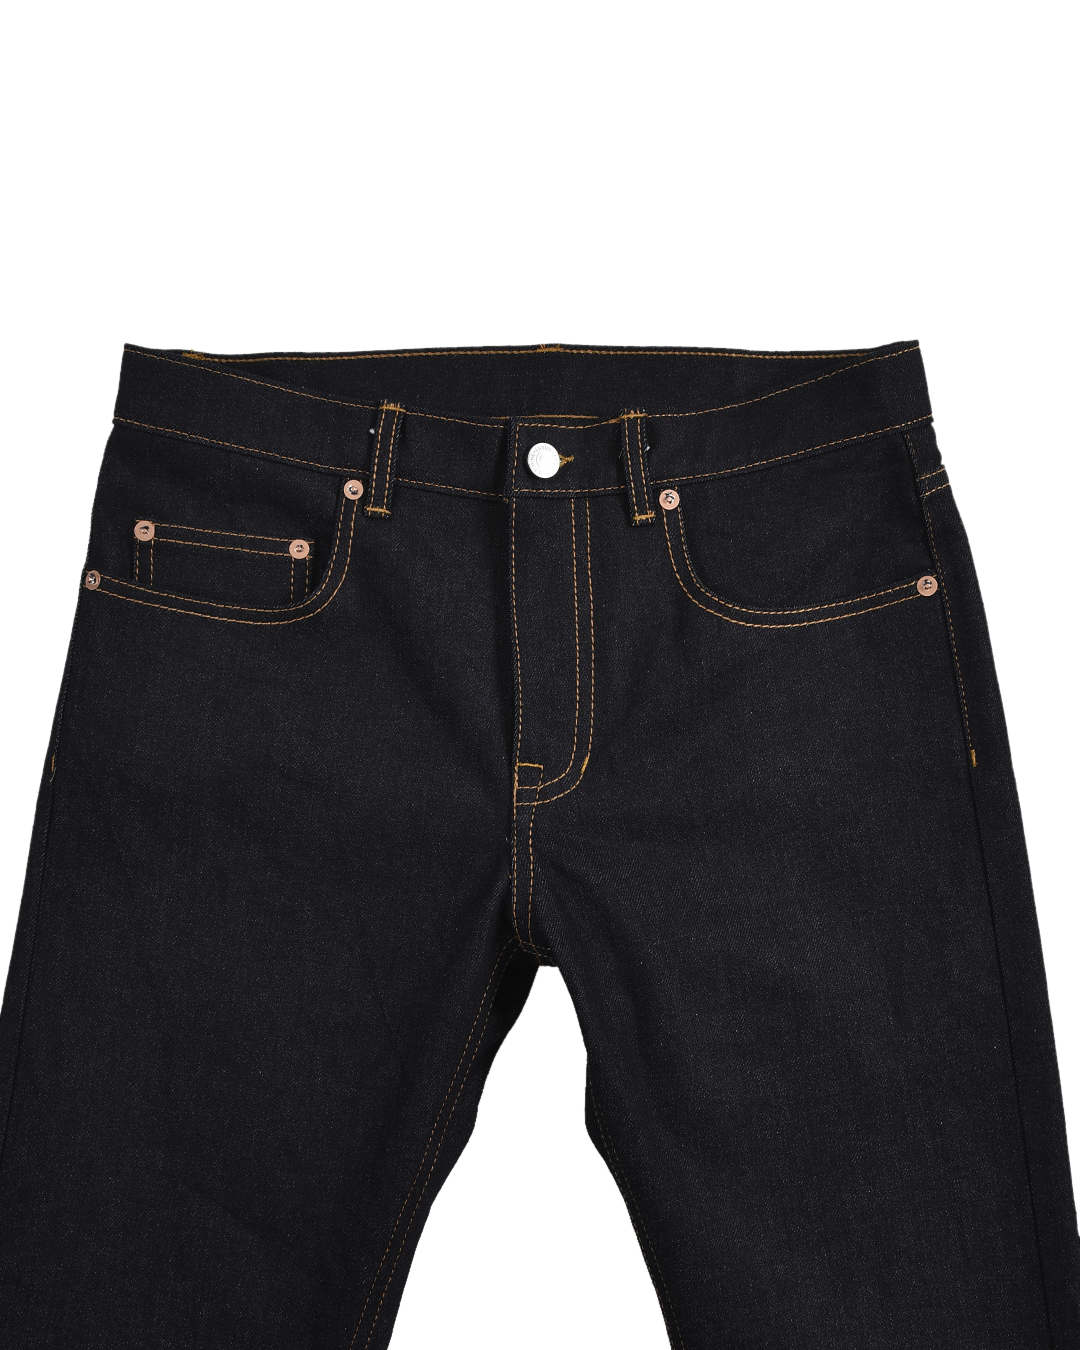 Front profile view of mens jeans by Luxire in indigo